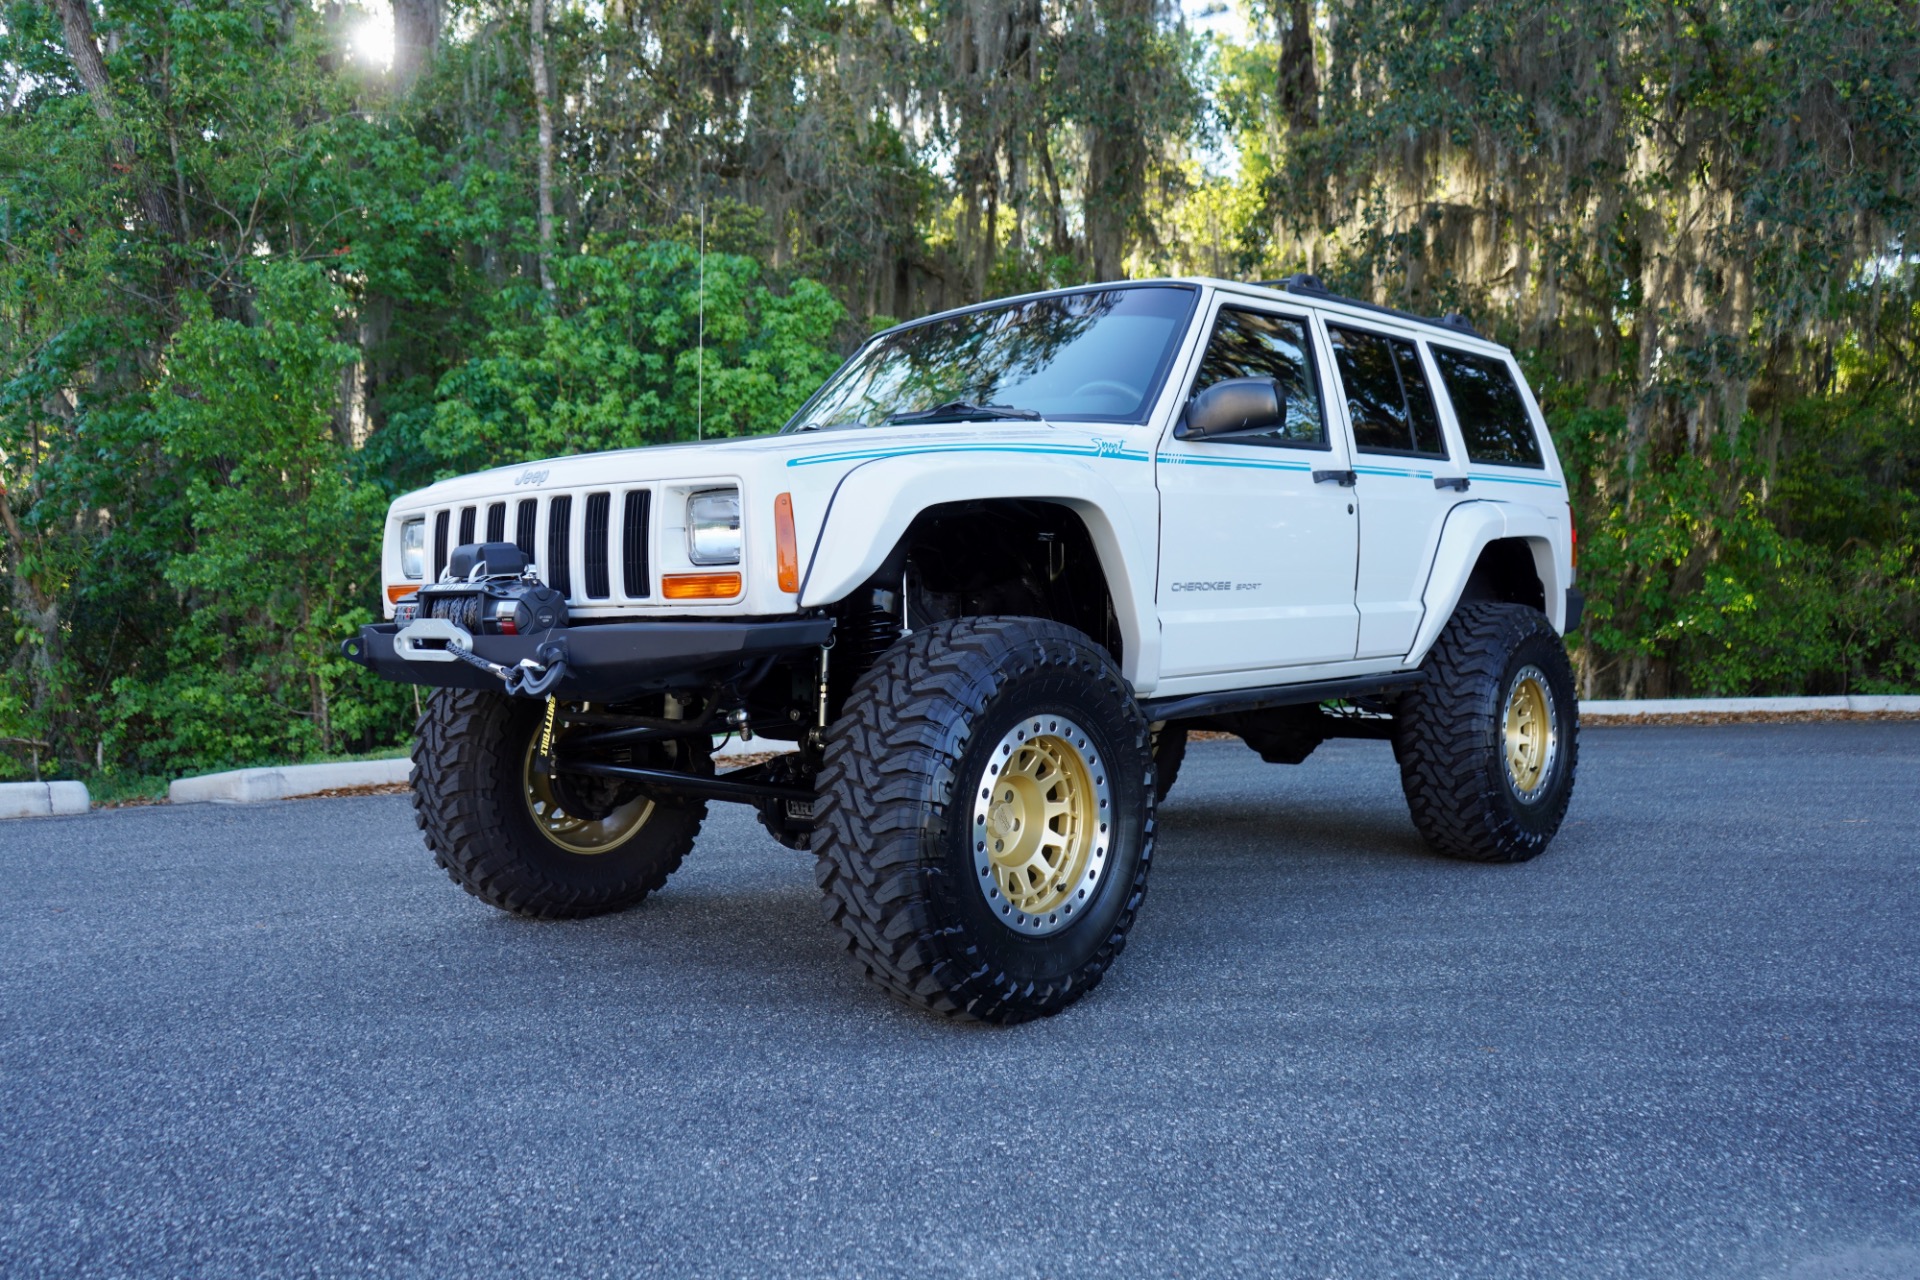 Used-1999-Jeep-Cherokee-SPORT-4X4-KCO-FRESH-BUILD-SPORT-1711215257-for-sale-01